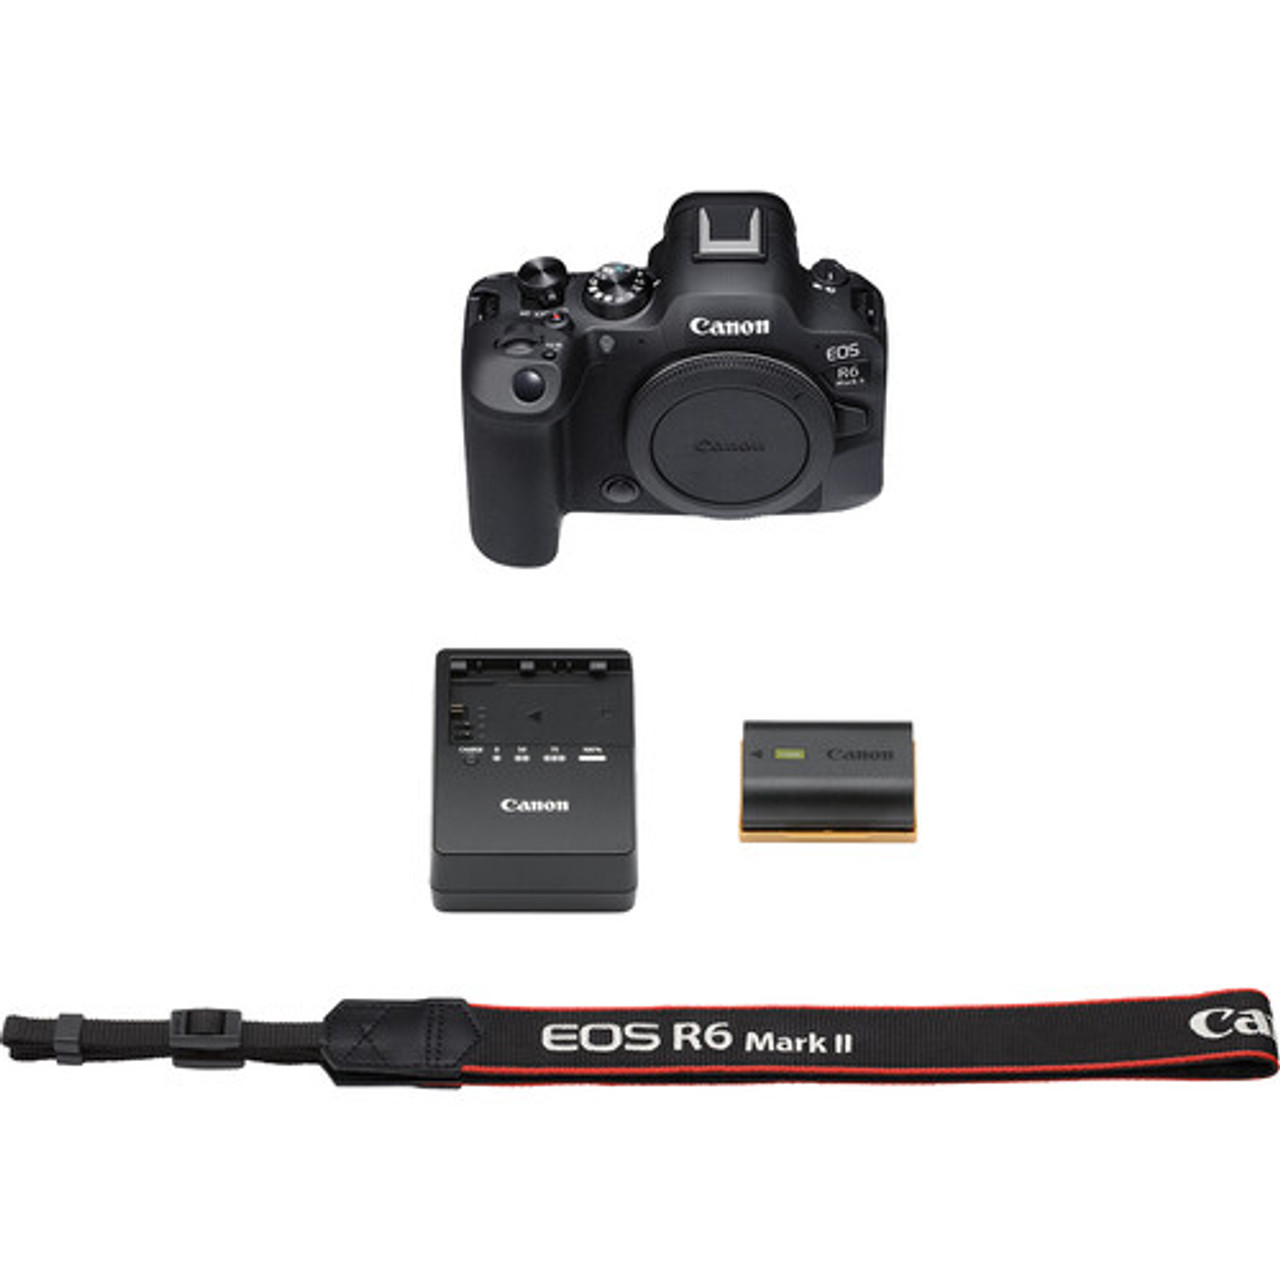 noorden metaal Rentmeester Canon EOS R6 Mark II Mirrorless Camera with Stop Motion Animation Firmware